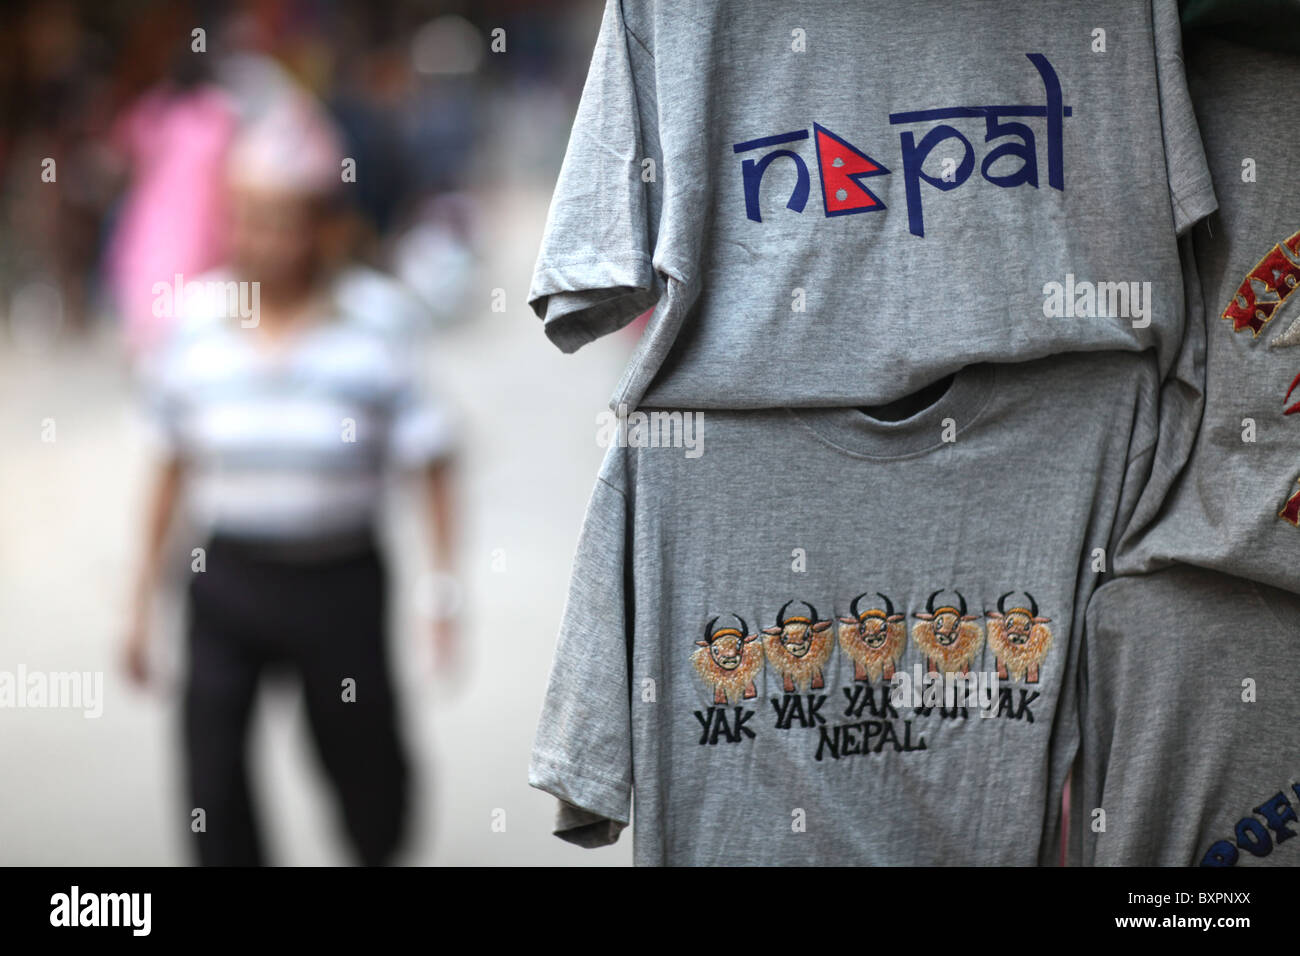 T shirts on display at a shop in in Kathmandu, Nepal in Asia Stock Photo